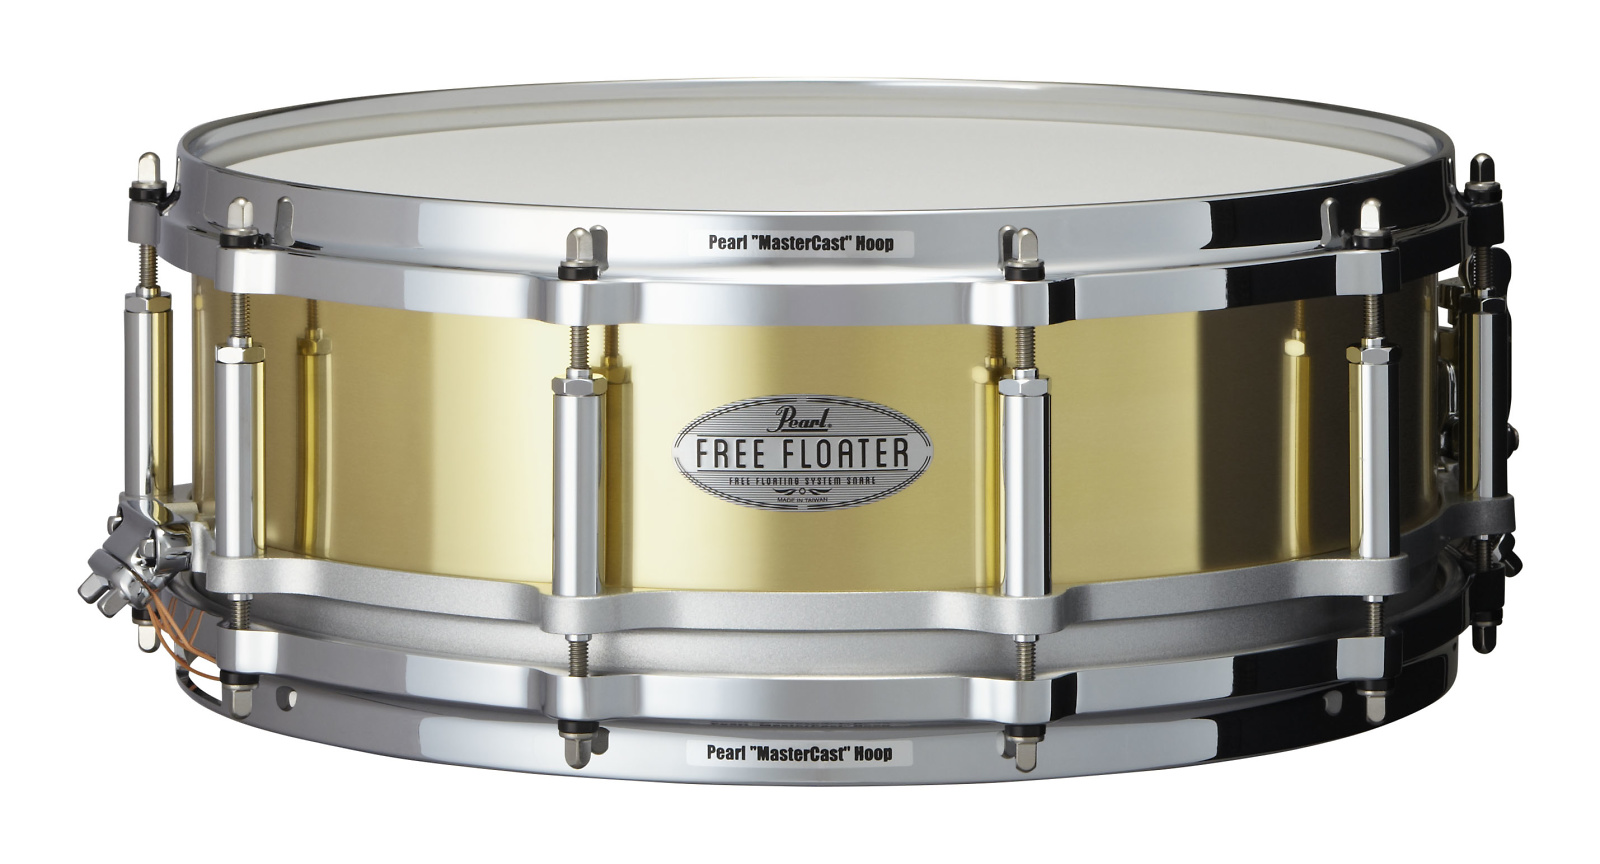 FTBR1450 Pearl Free Floating 14x5 Brass Snare Drum